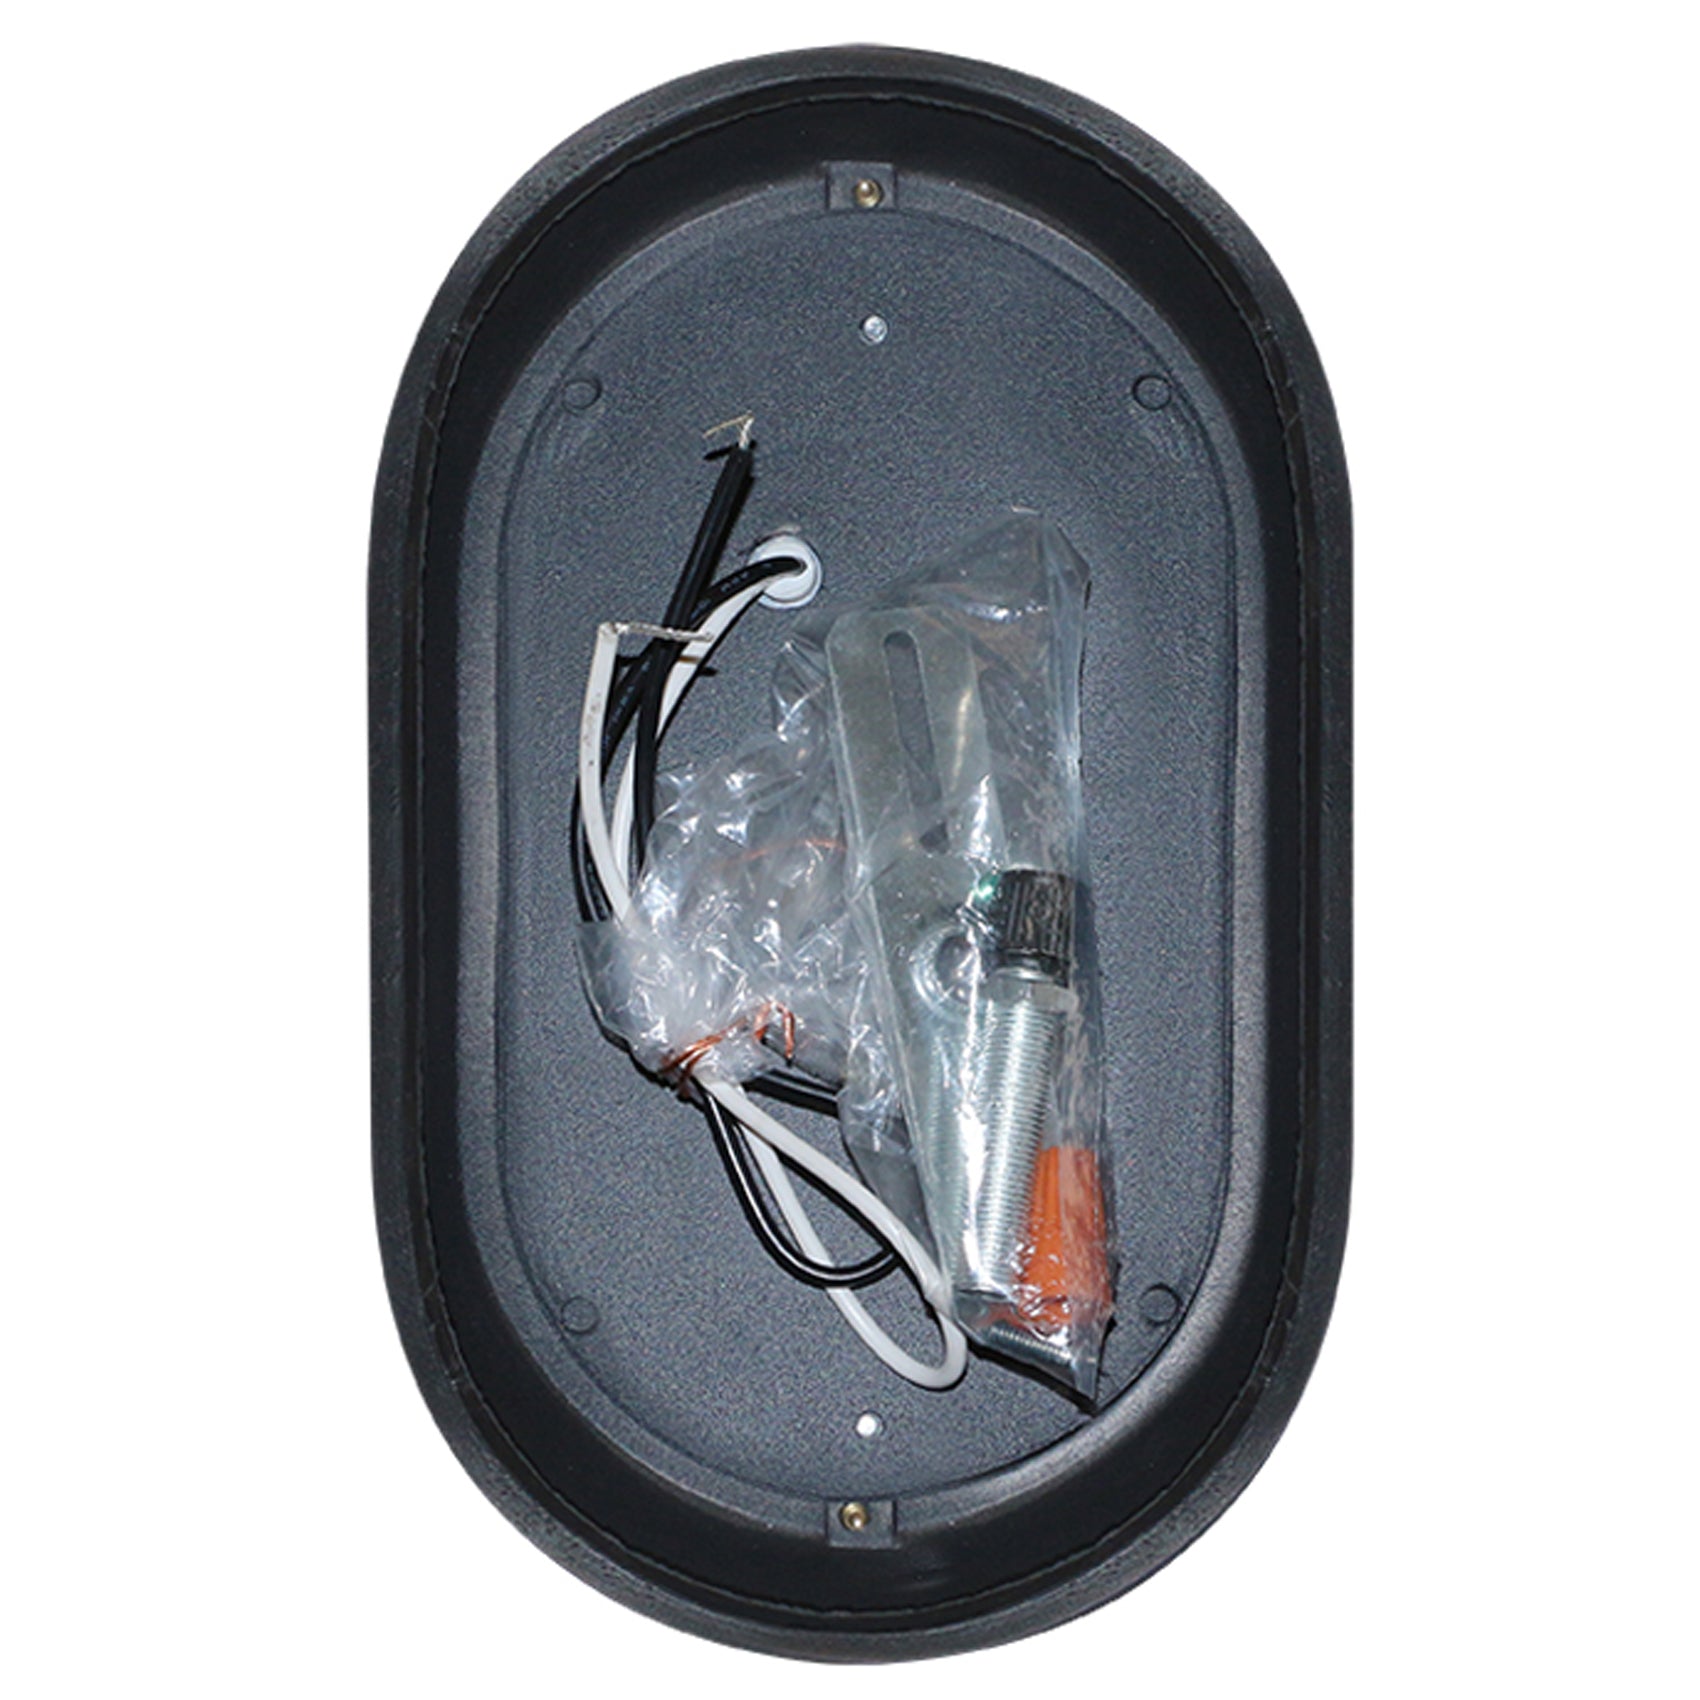 Wet-Rated Black LED Wall Sconce with Cool White Light for Bright Illumination